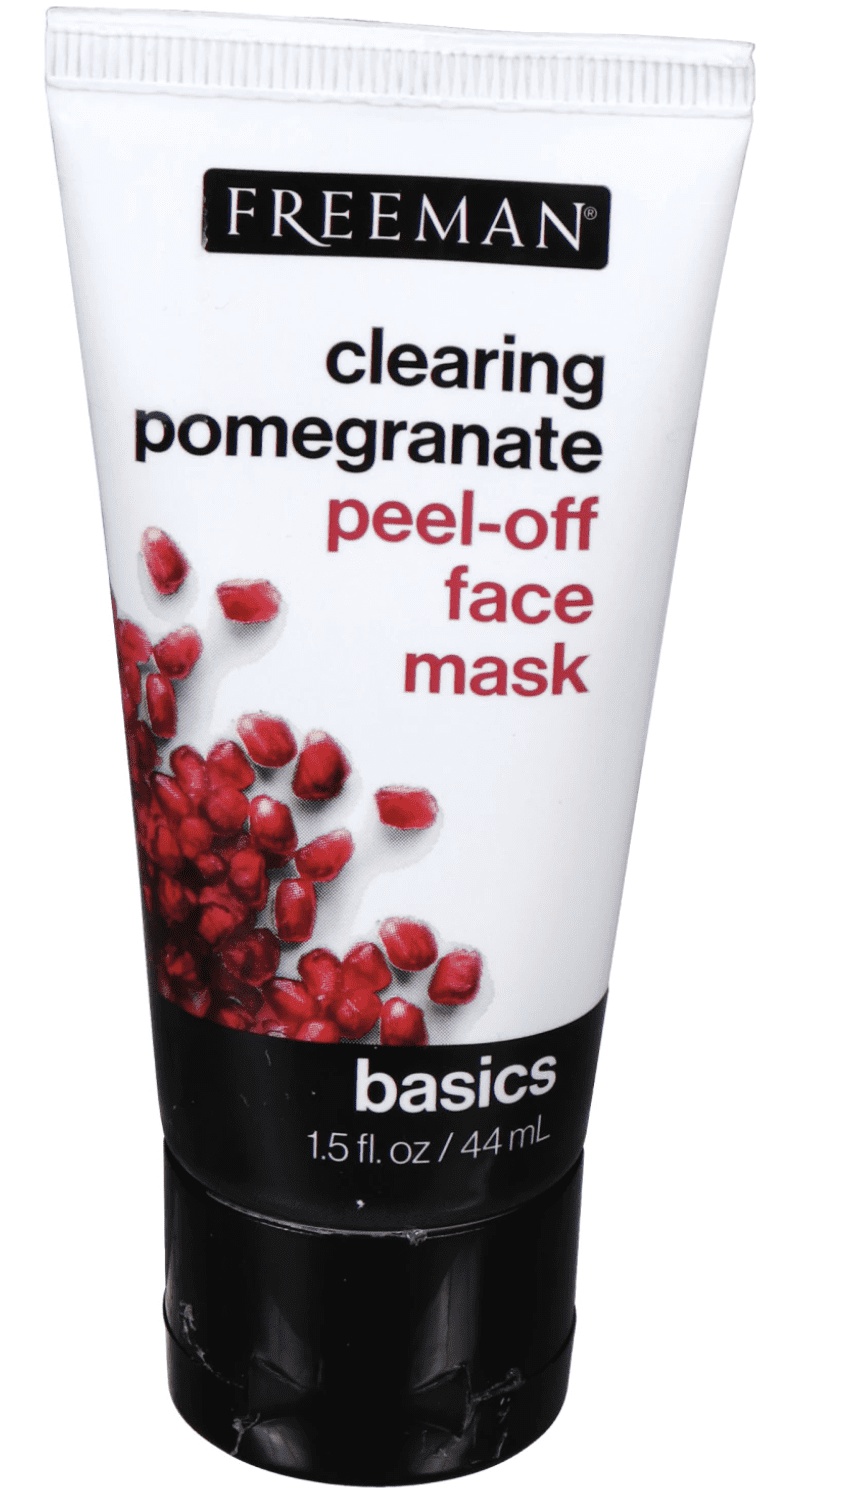 Freeman Clearing Pomegranate Peel-off Face Mask